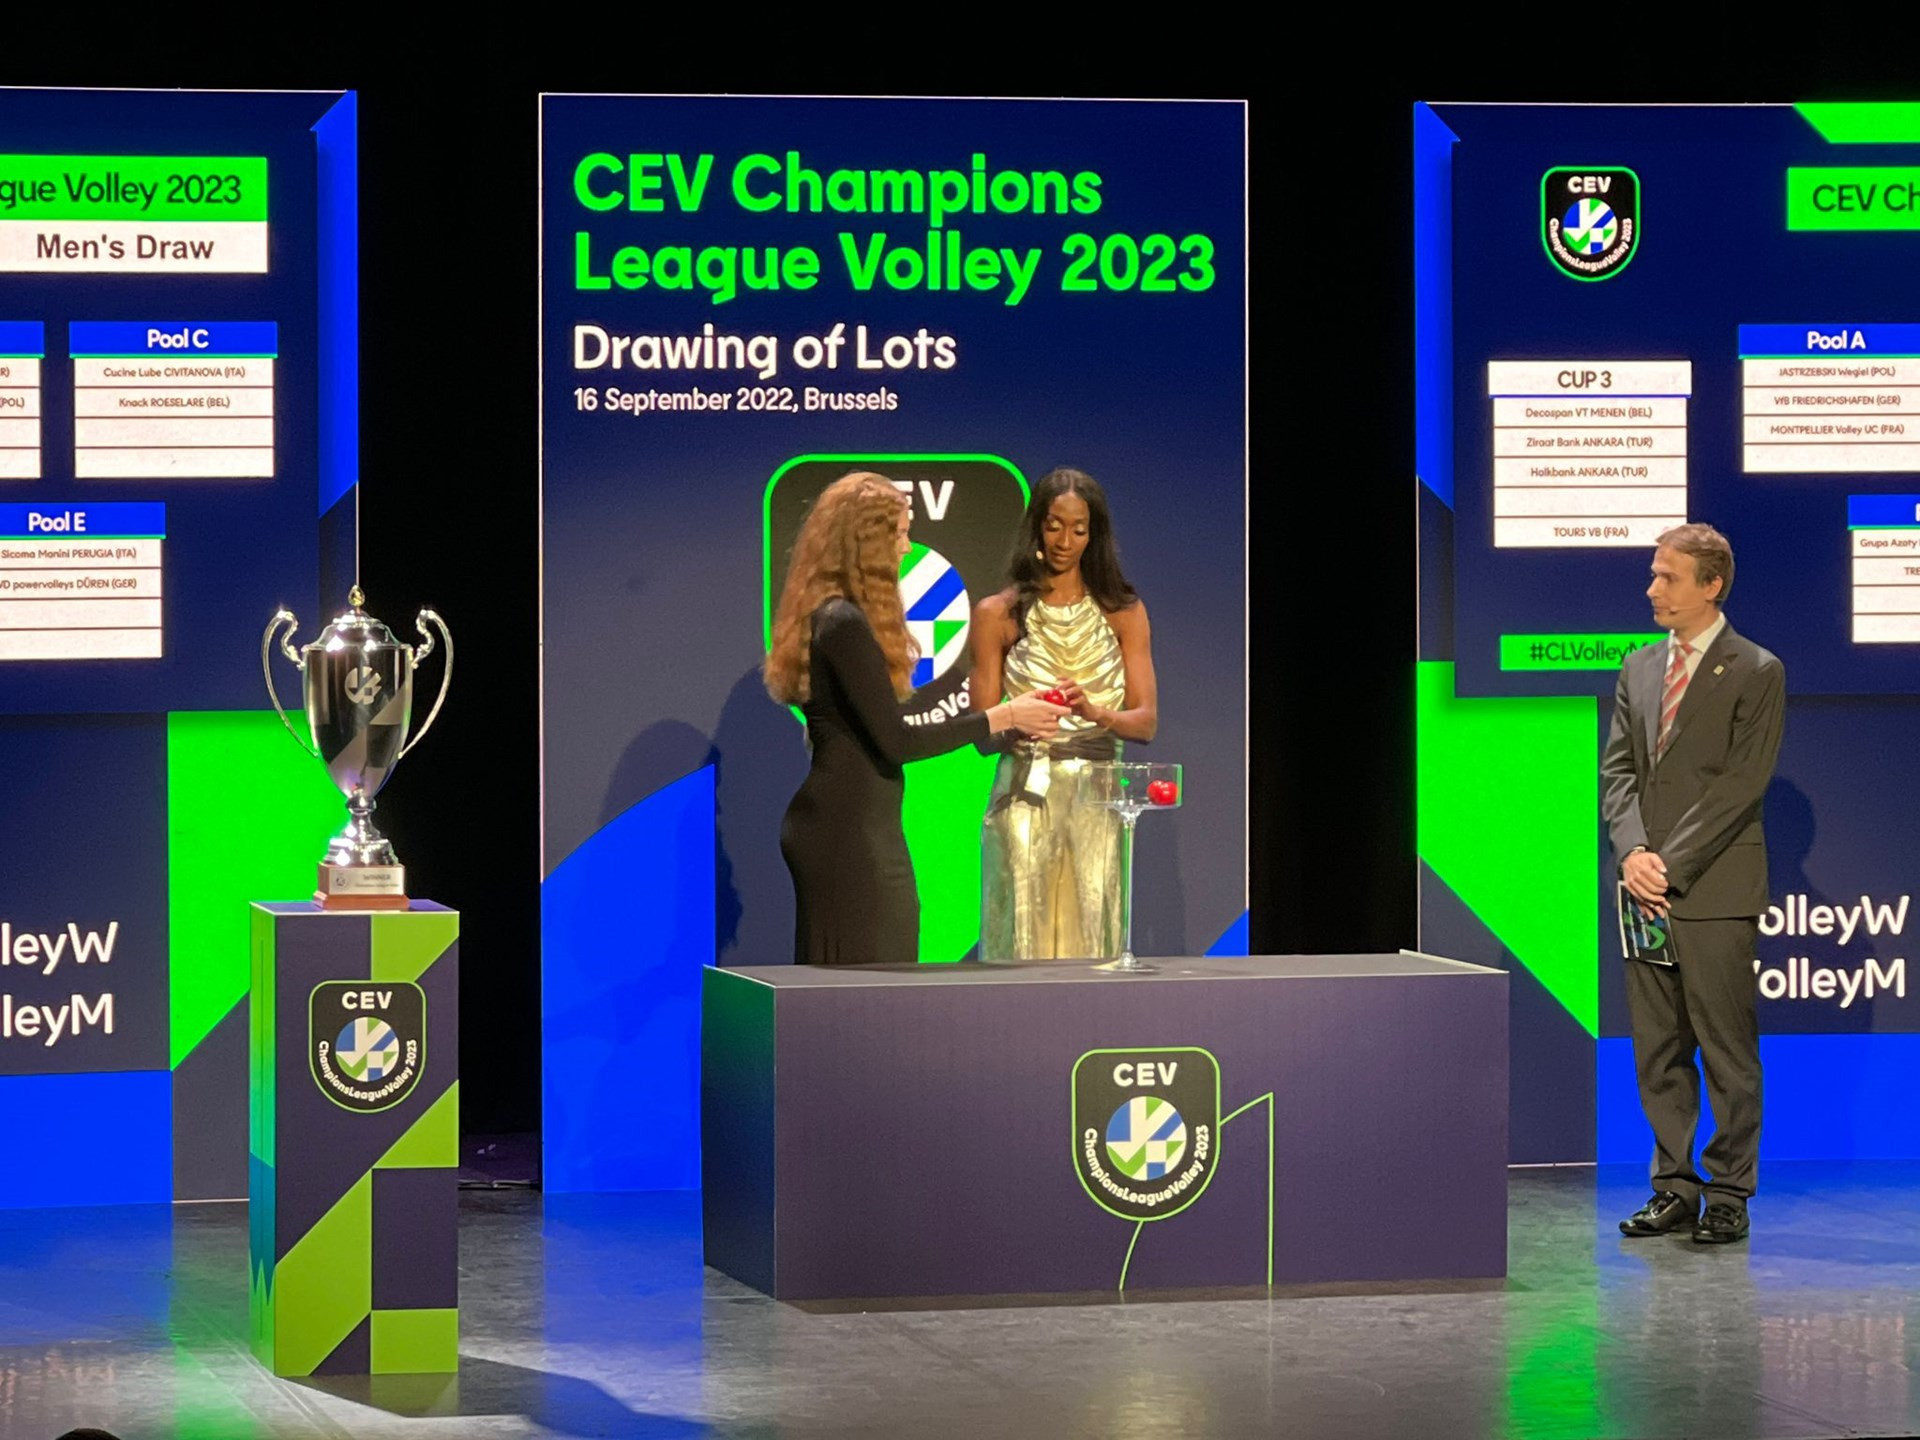 Haak sisters set to battle it out as CEV Champions League draw concludes